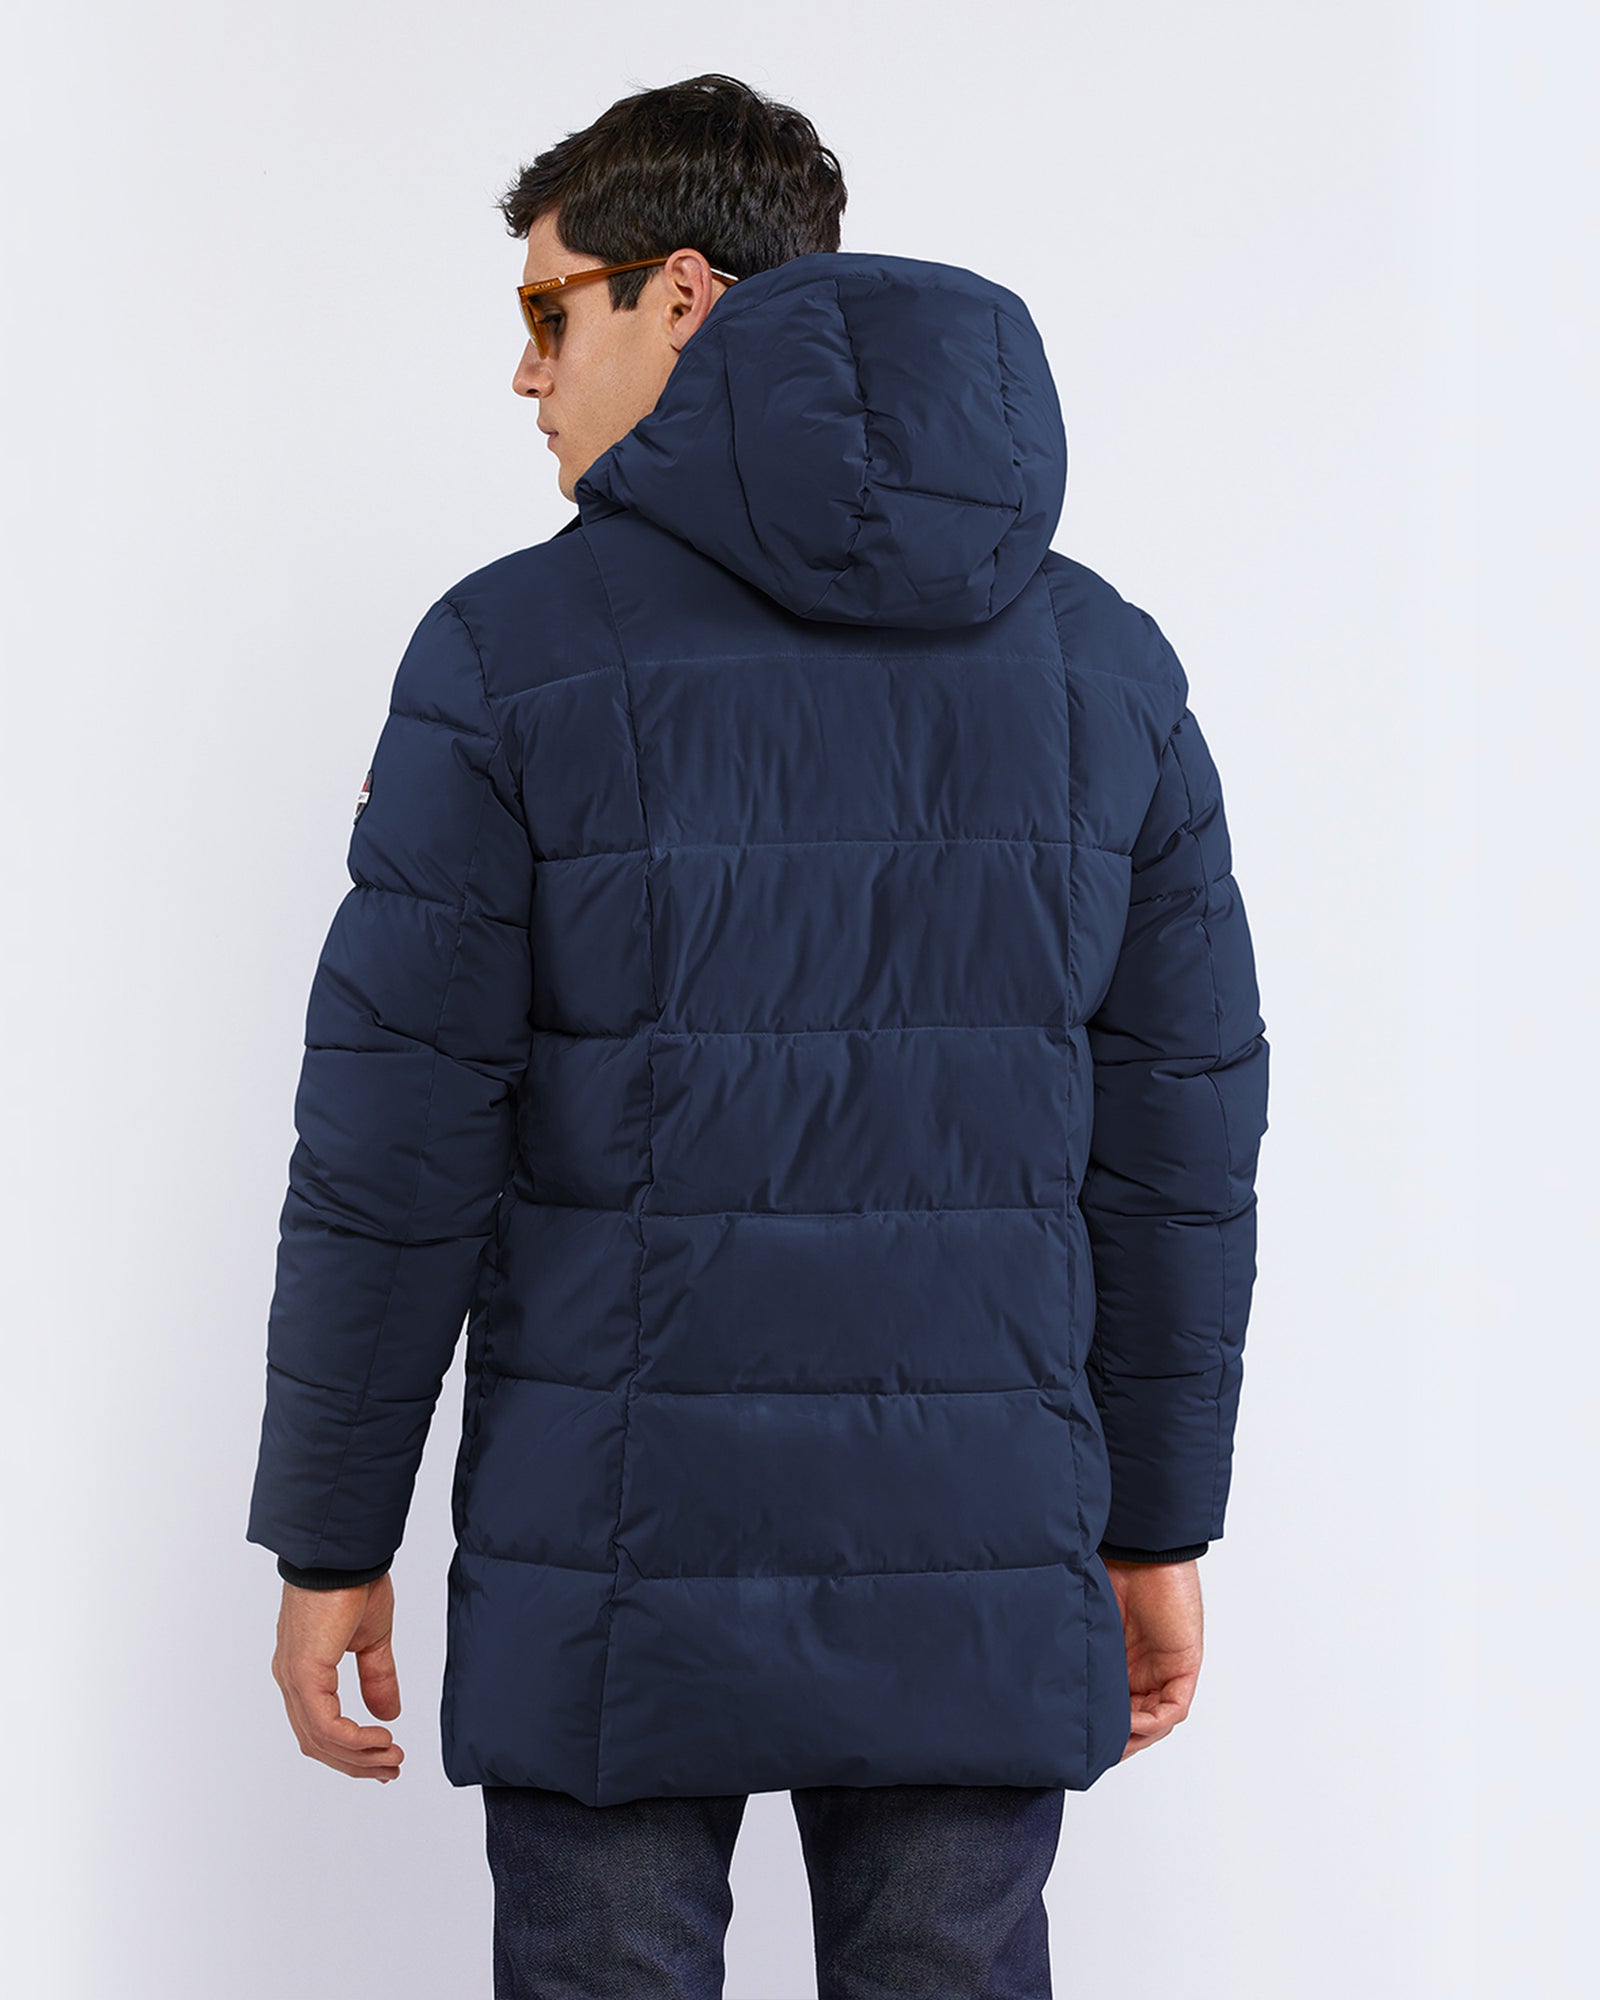 EUFRATE DOWN JACKET - FINAL SALE